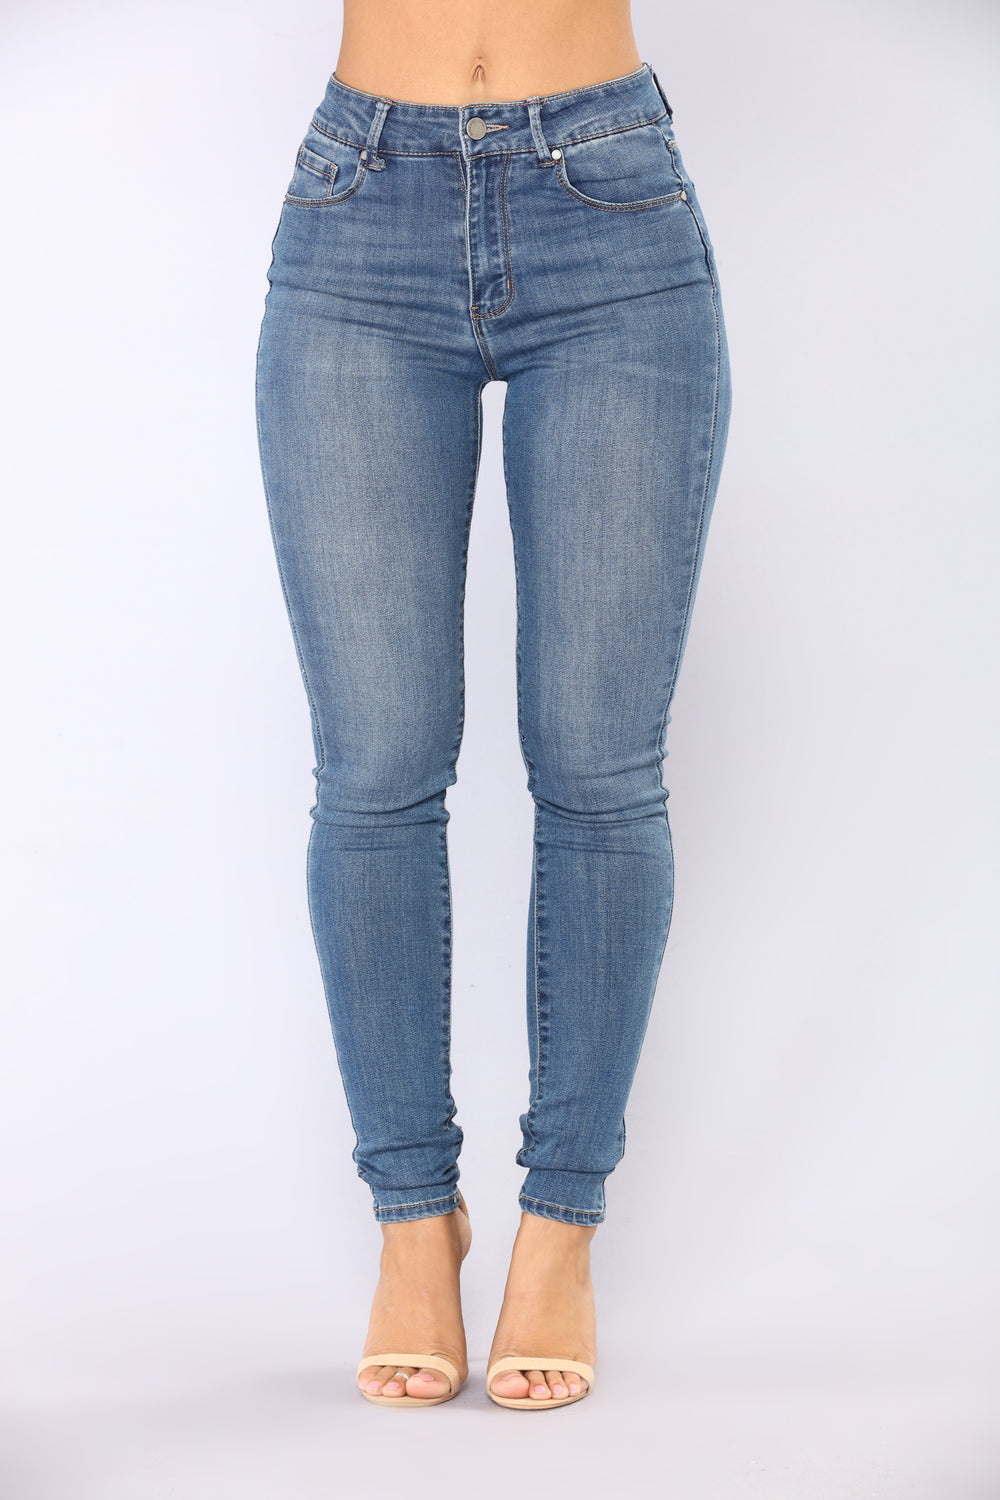 Booty Bounce High Rise Jeans - Medium Blue Wash